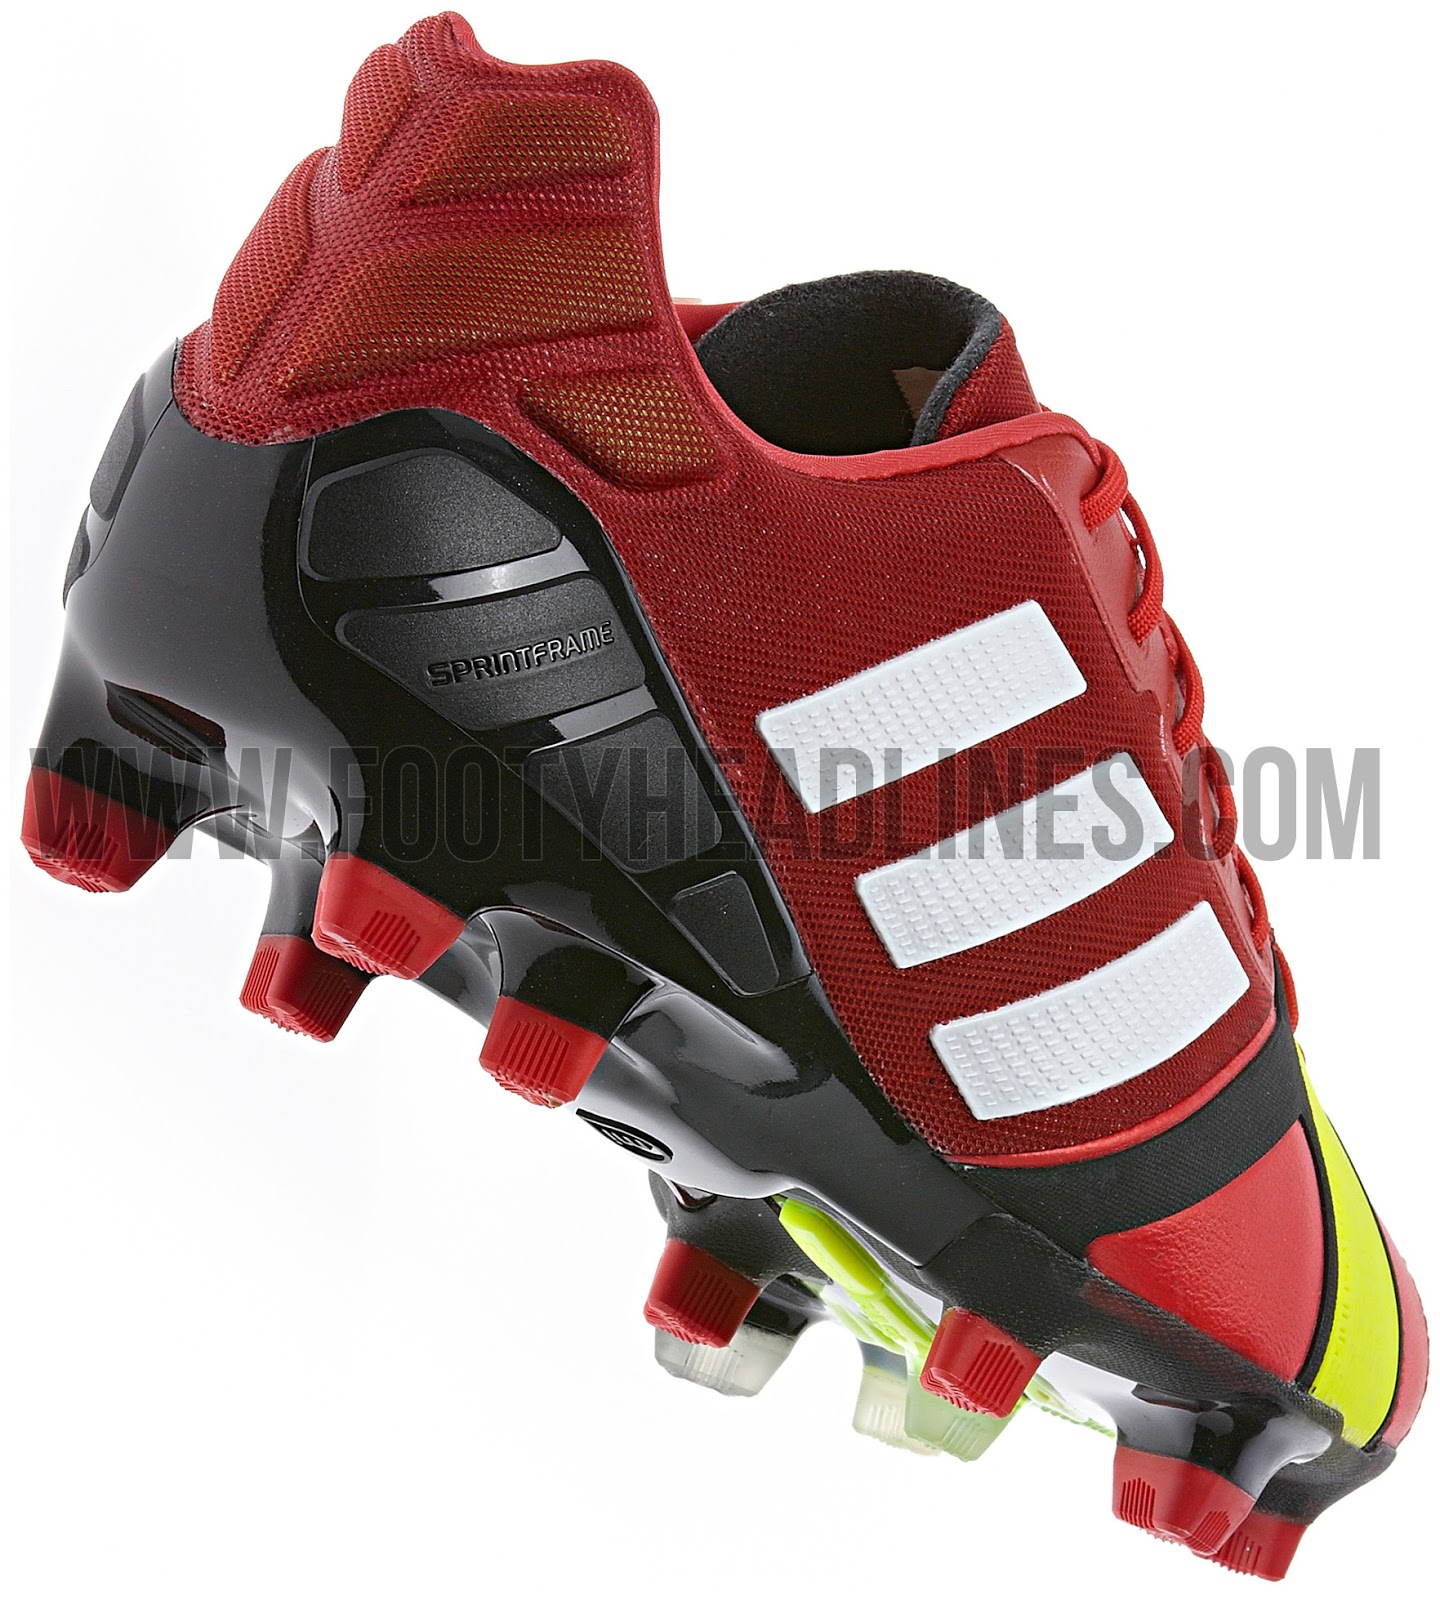 Adidas 13-14 Nitrocharge CL Red Boot Colorway Released ...